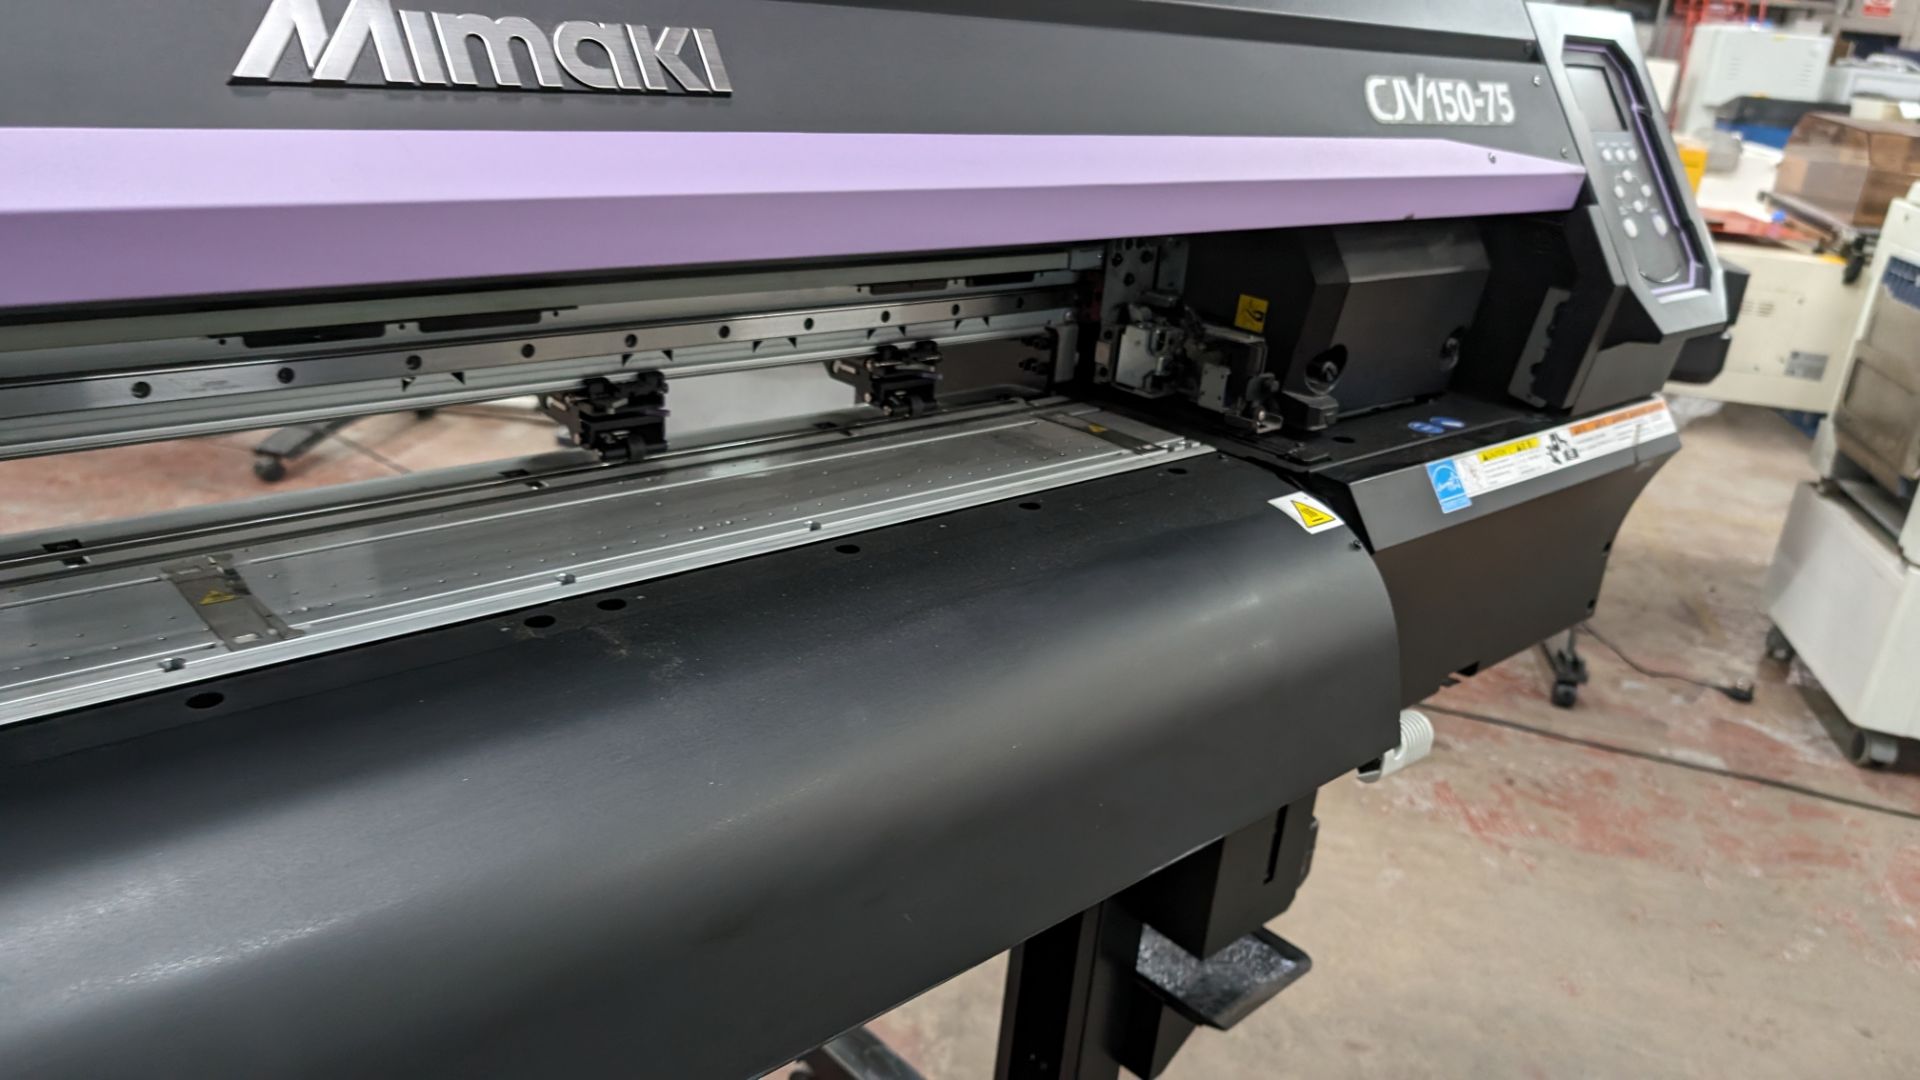 Mimaki CJV150-75 wide format printer including quantity of software as pictured, 800mm max print wid - Image 14 of 21